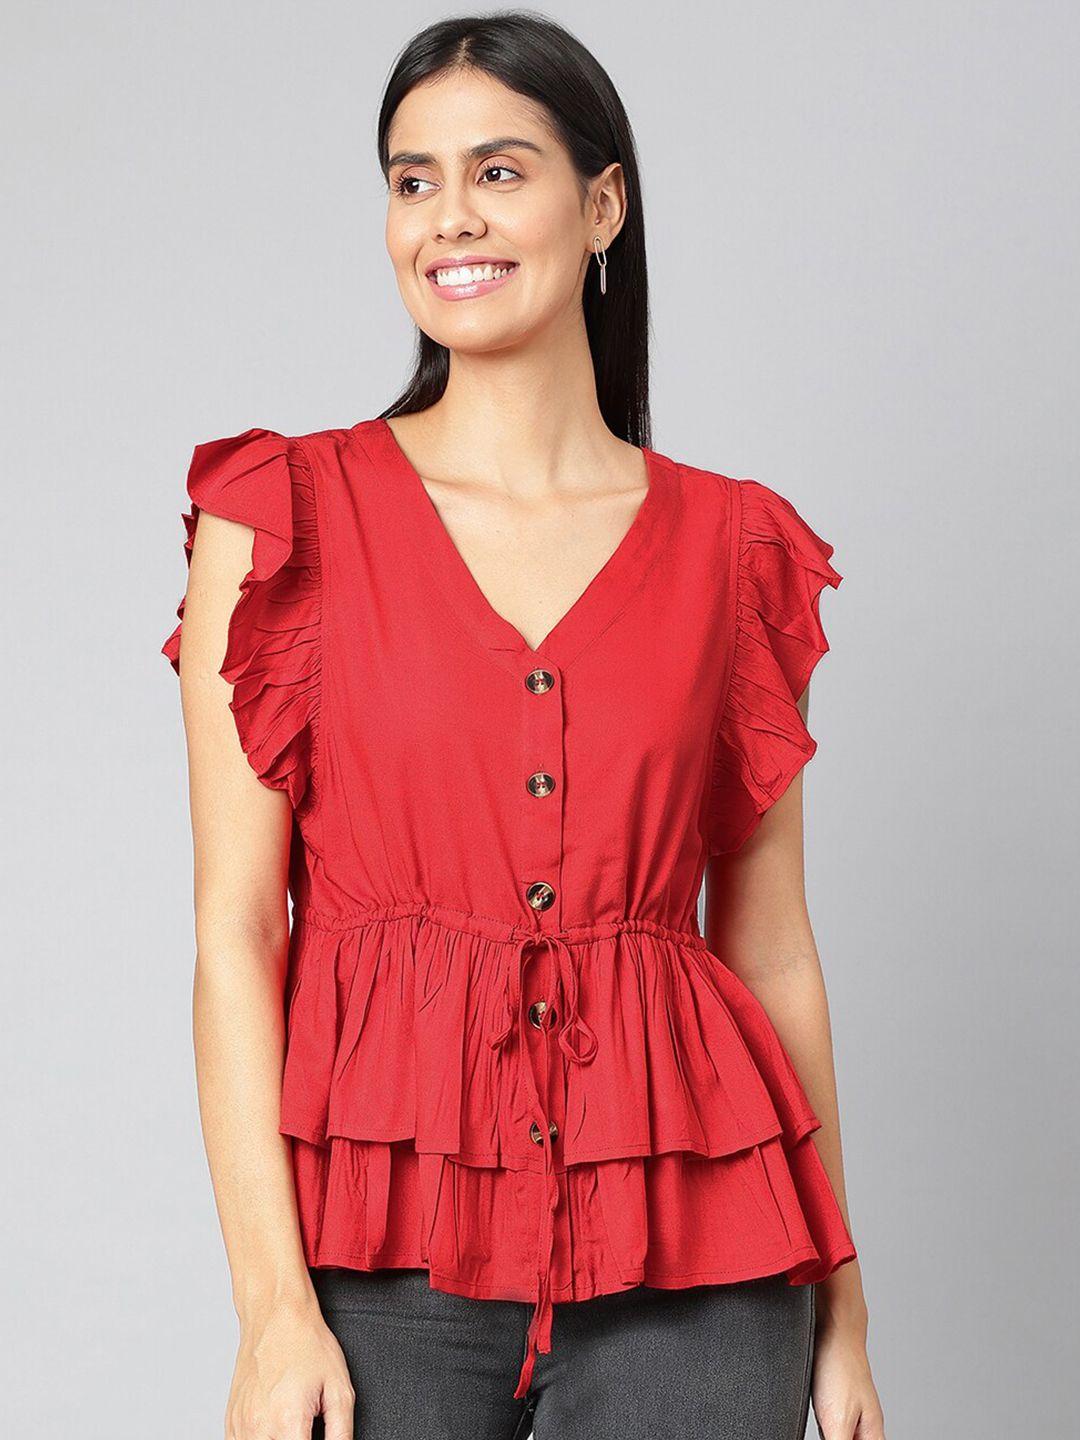 finsbury-london-red-layered-pure-cotton-cinched-waist-top